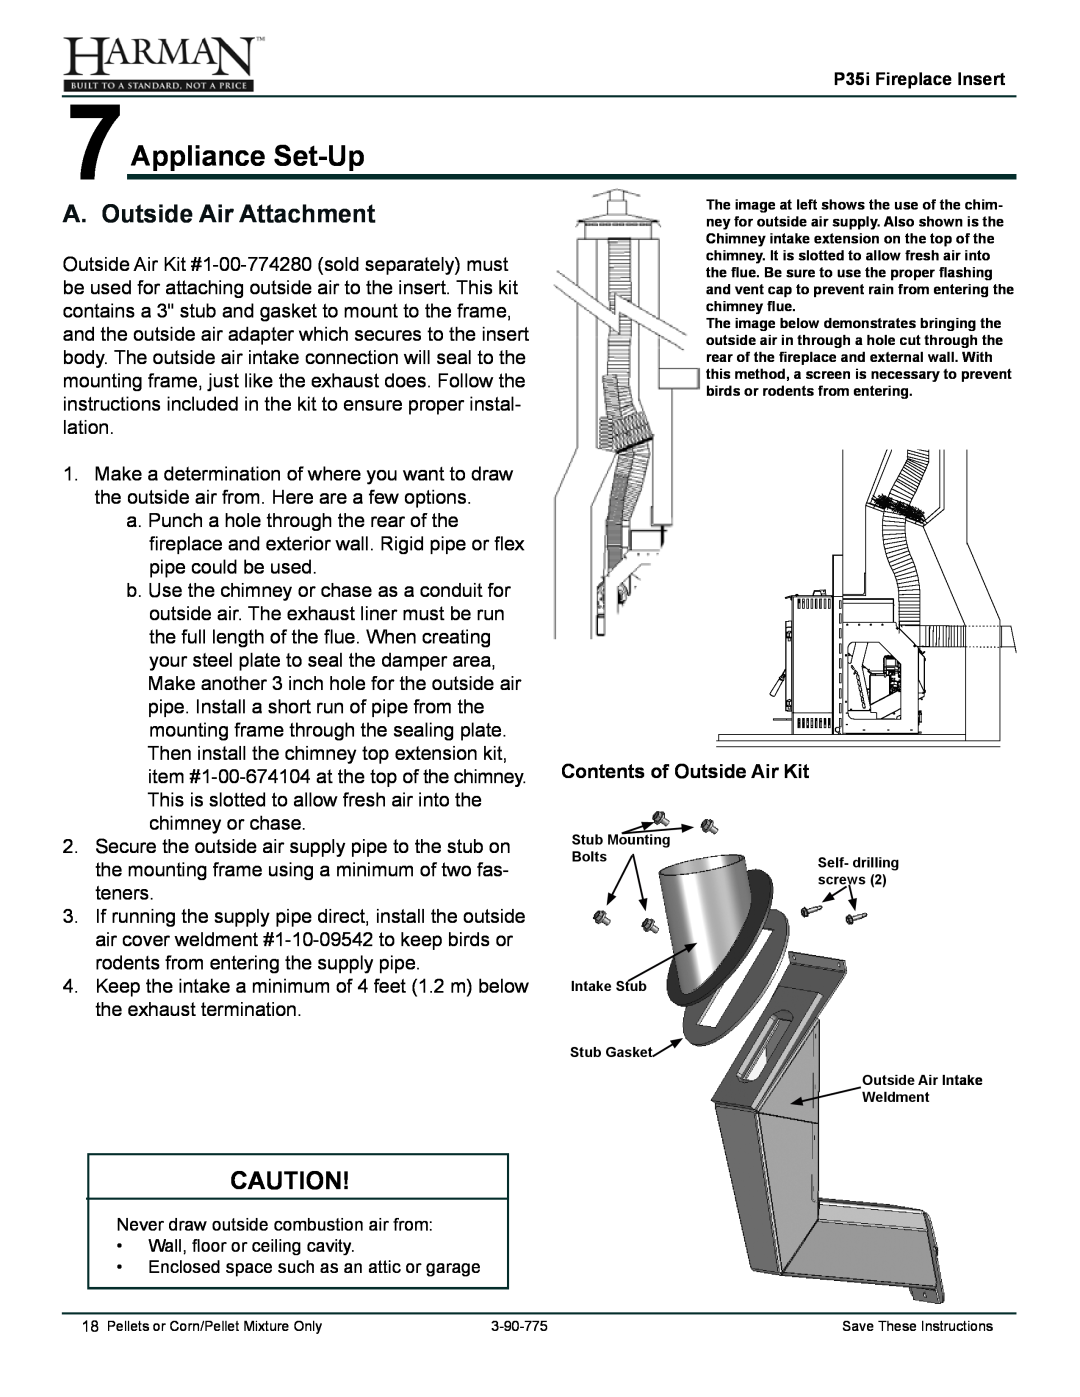 Harman Stove Company P35I owner manual 7Appliance Set-Up, A. Outside Air Attachment 